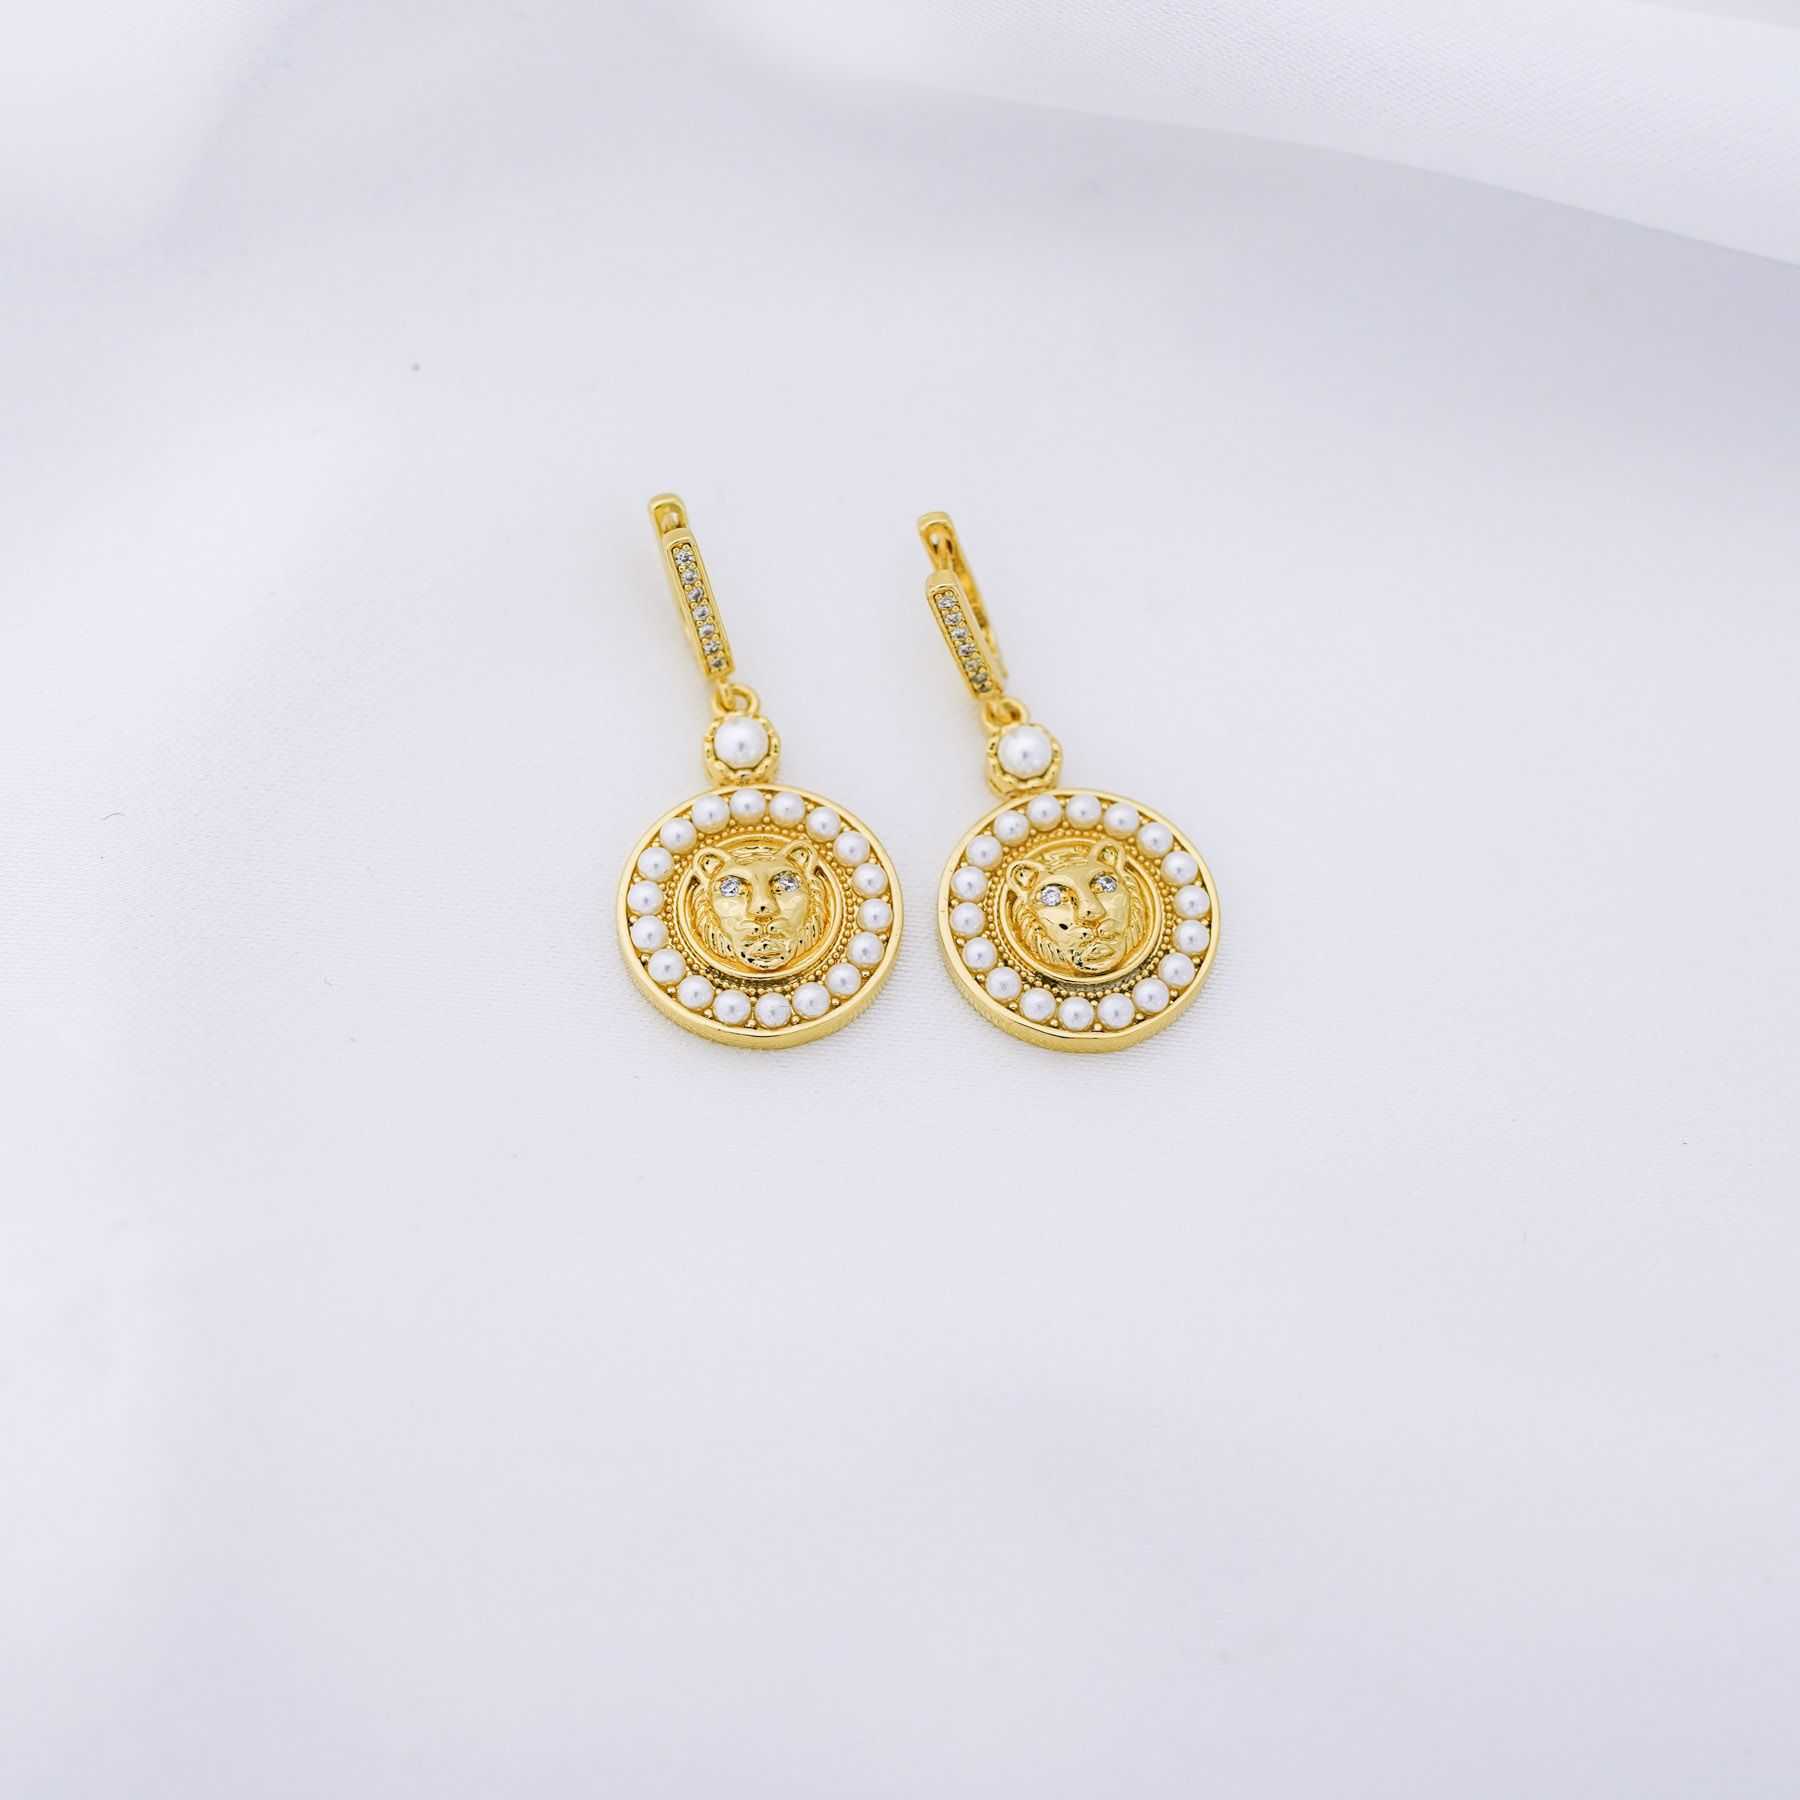 KING OF THE JUNGLE EARRINGS - GOLD